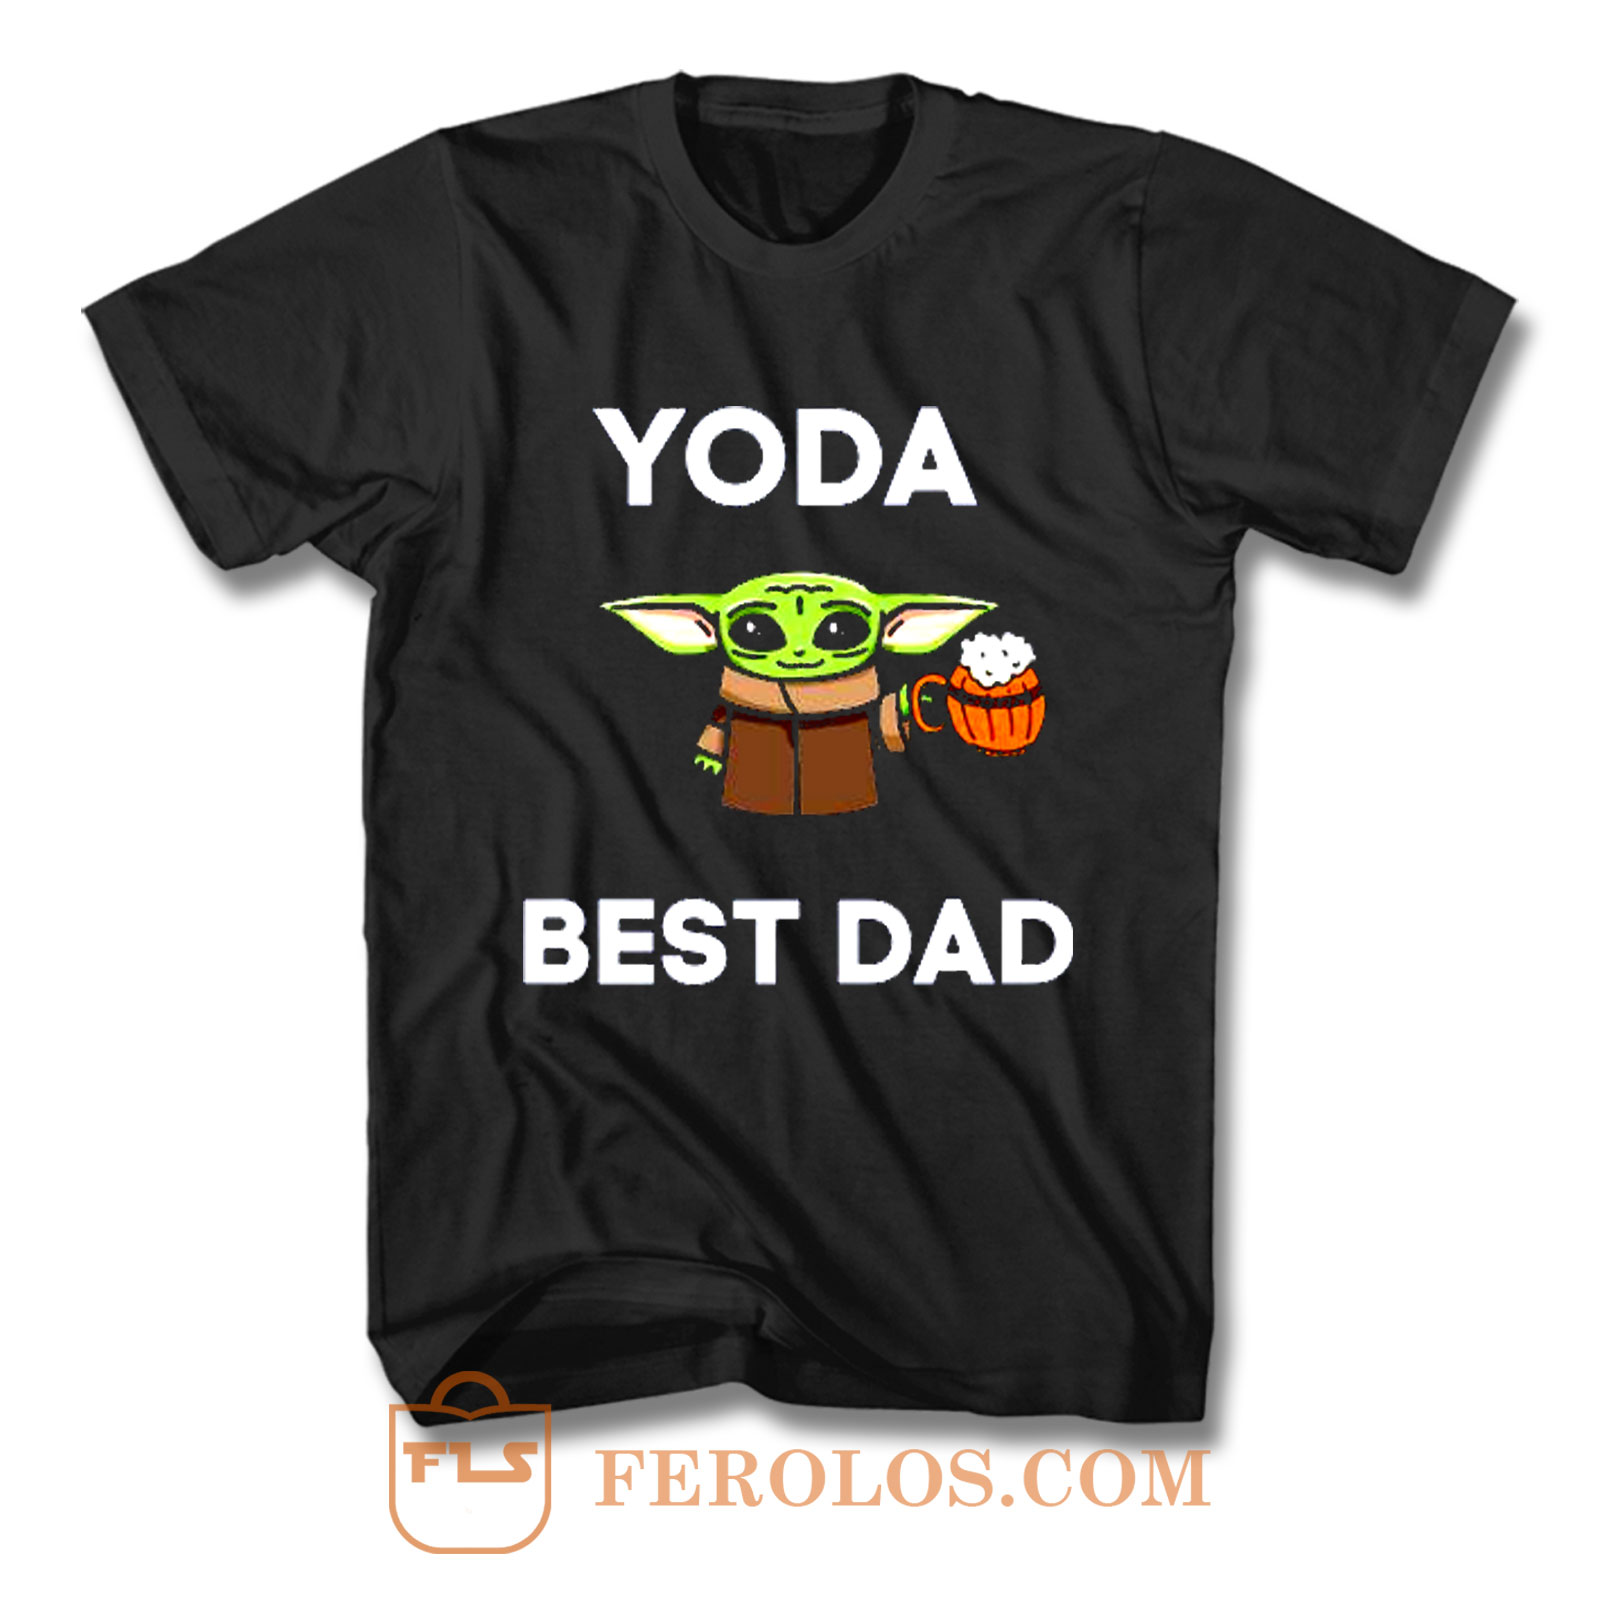 Yoda Best Dad Love You I Do Father Baby Yoda Funny Quotes Star Wars T Shirt  